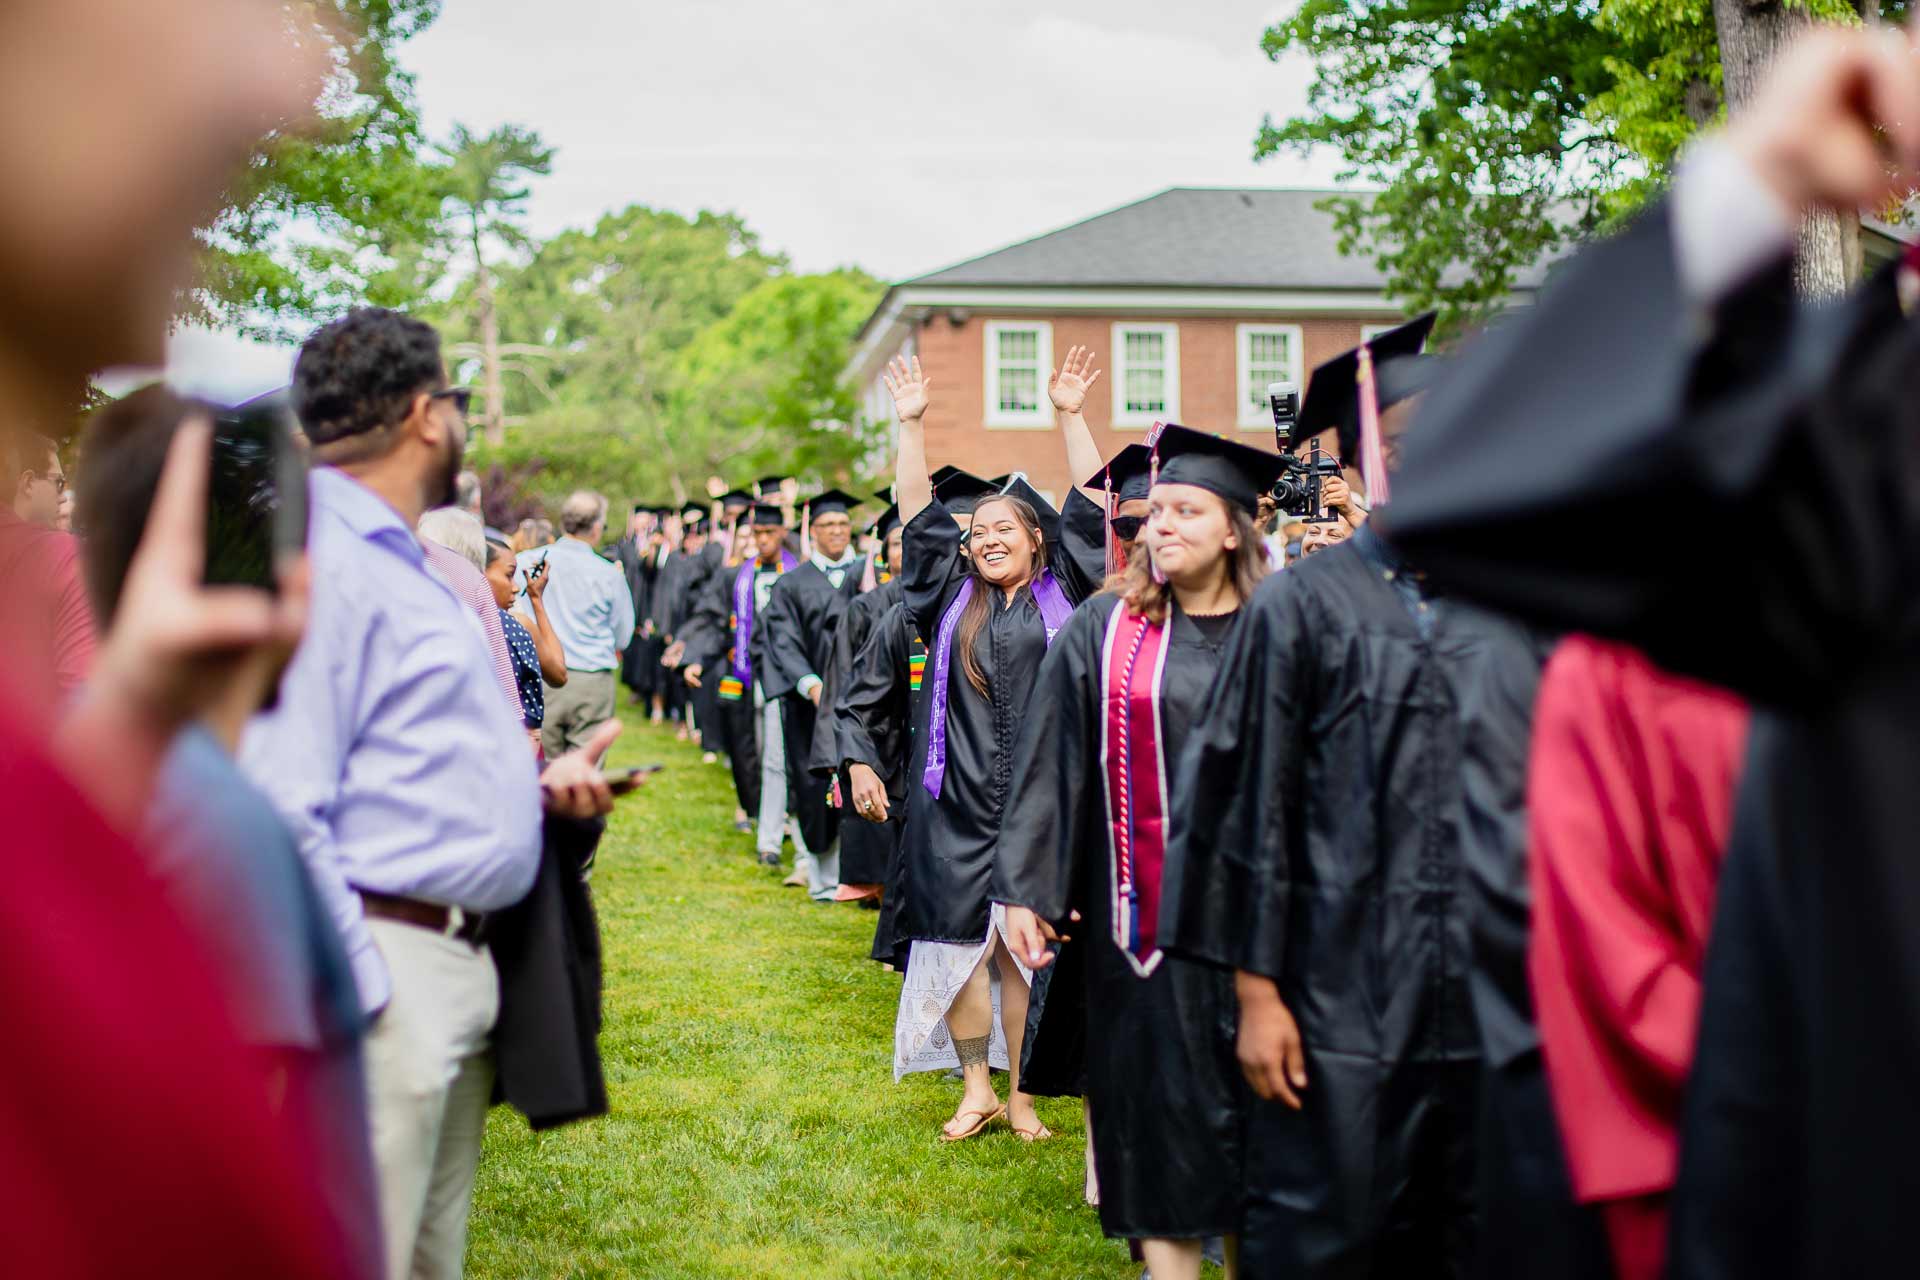 Graduating students walk to Commencement.